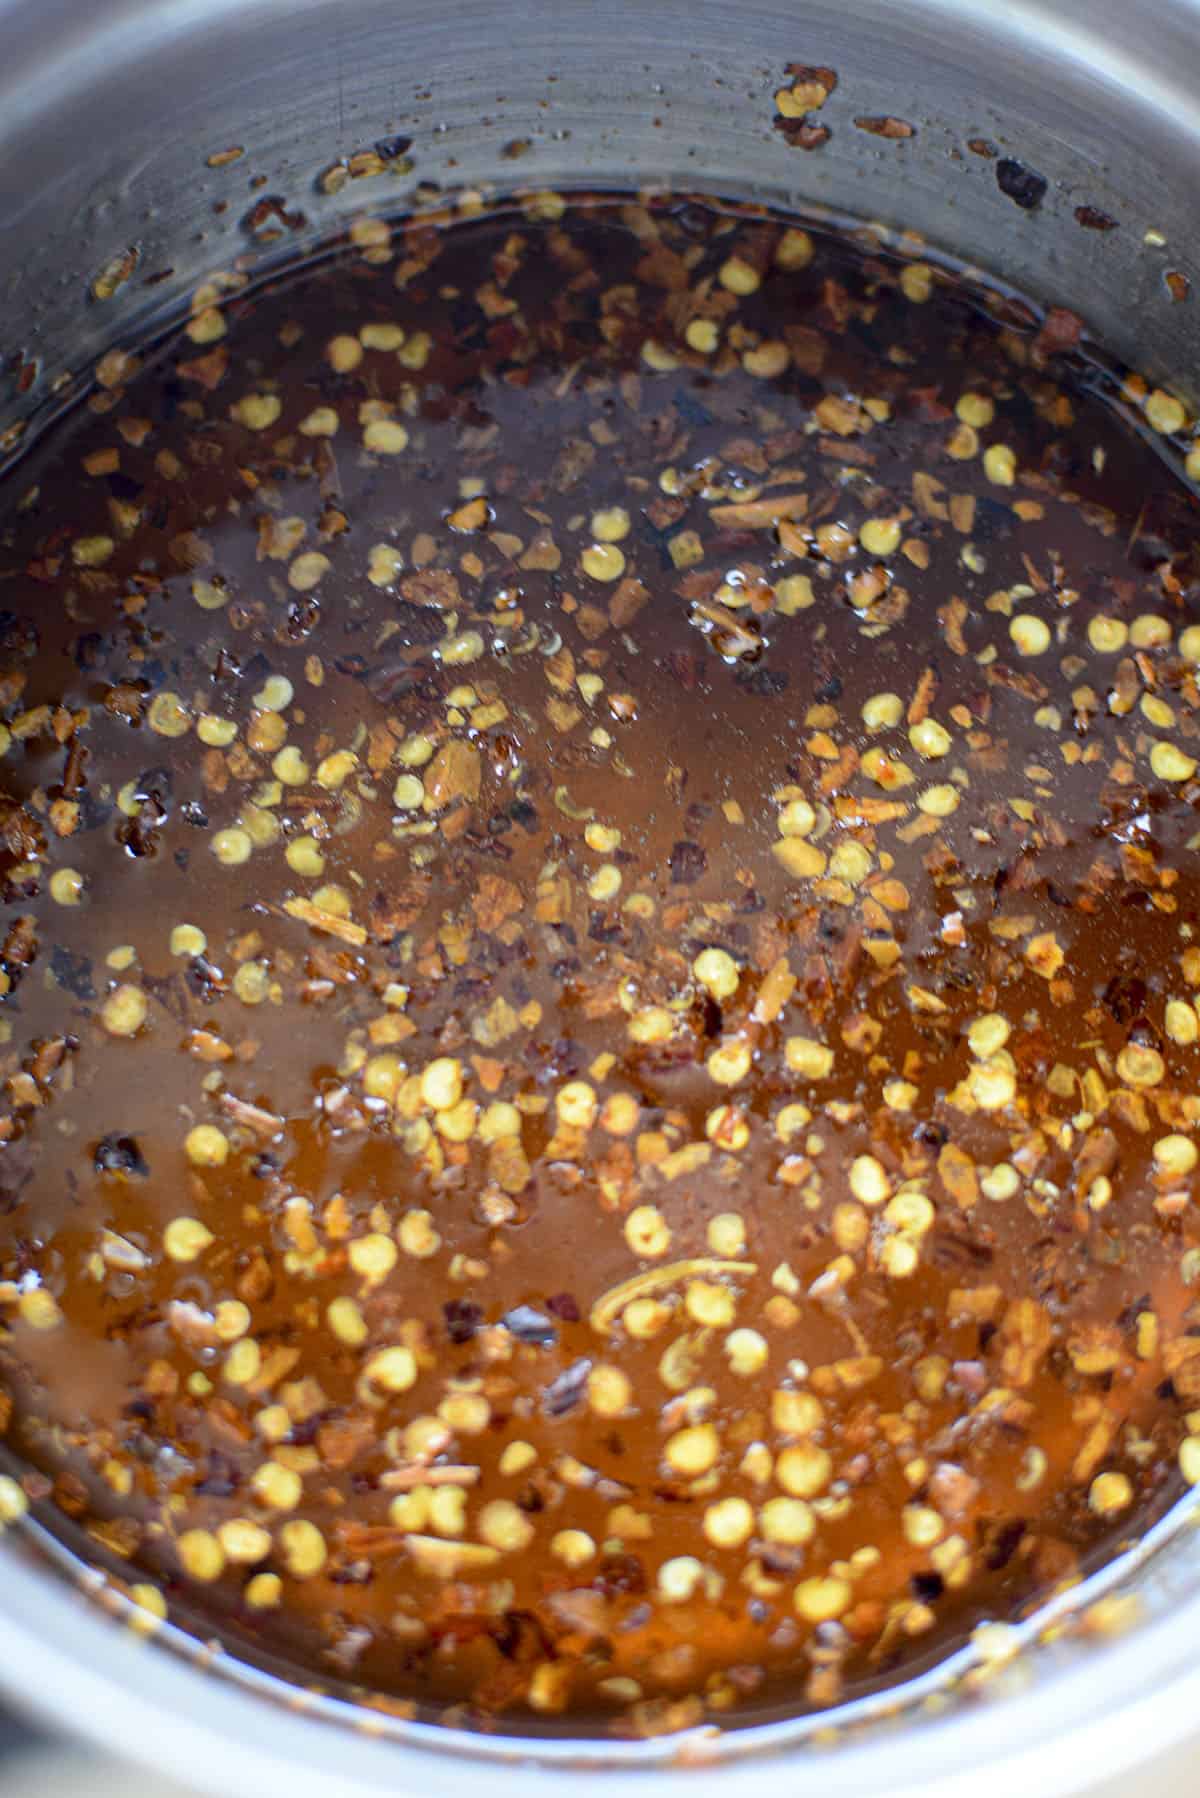 The hot honey is heated and infused in a pot. Ready to be bottled up.